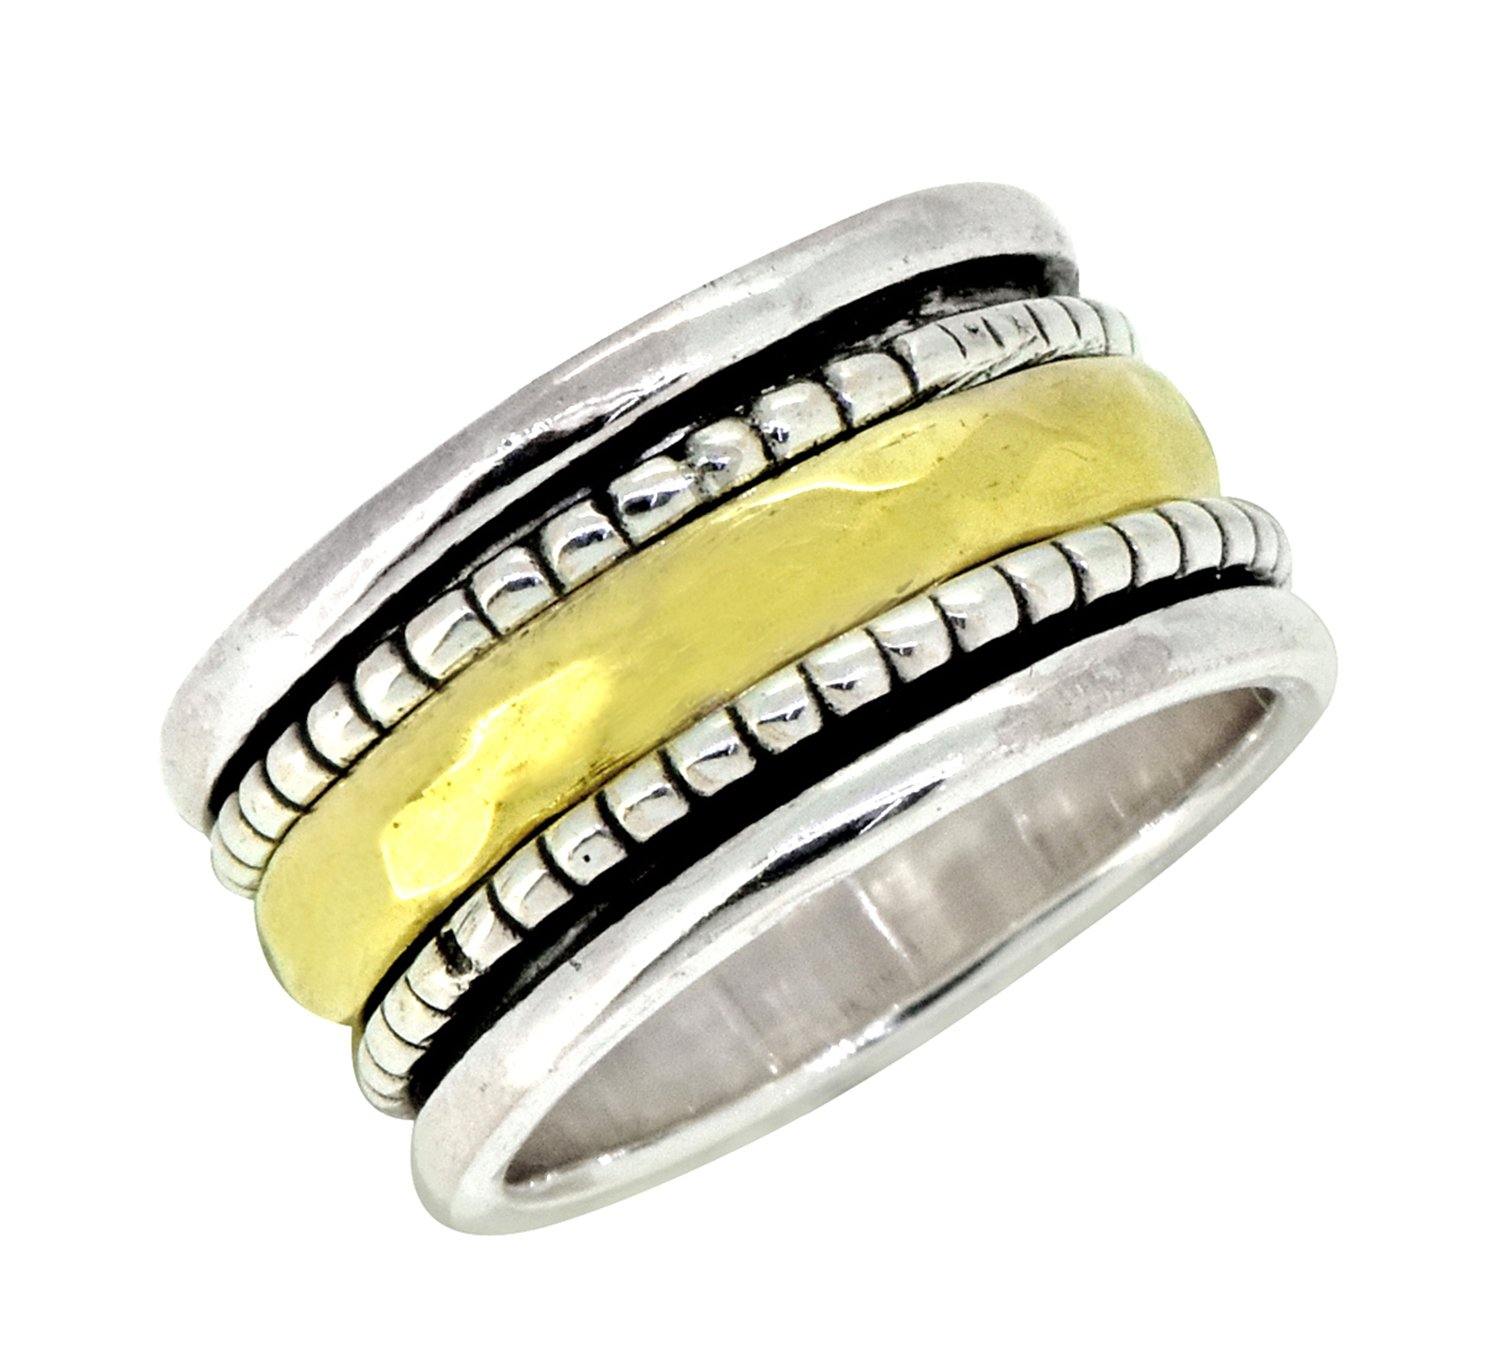 Solid 925 Sterling Silver Brass Meditation Spinning Ring Jewelry - YoTreasure